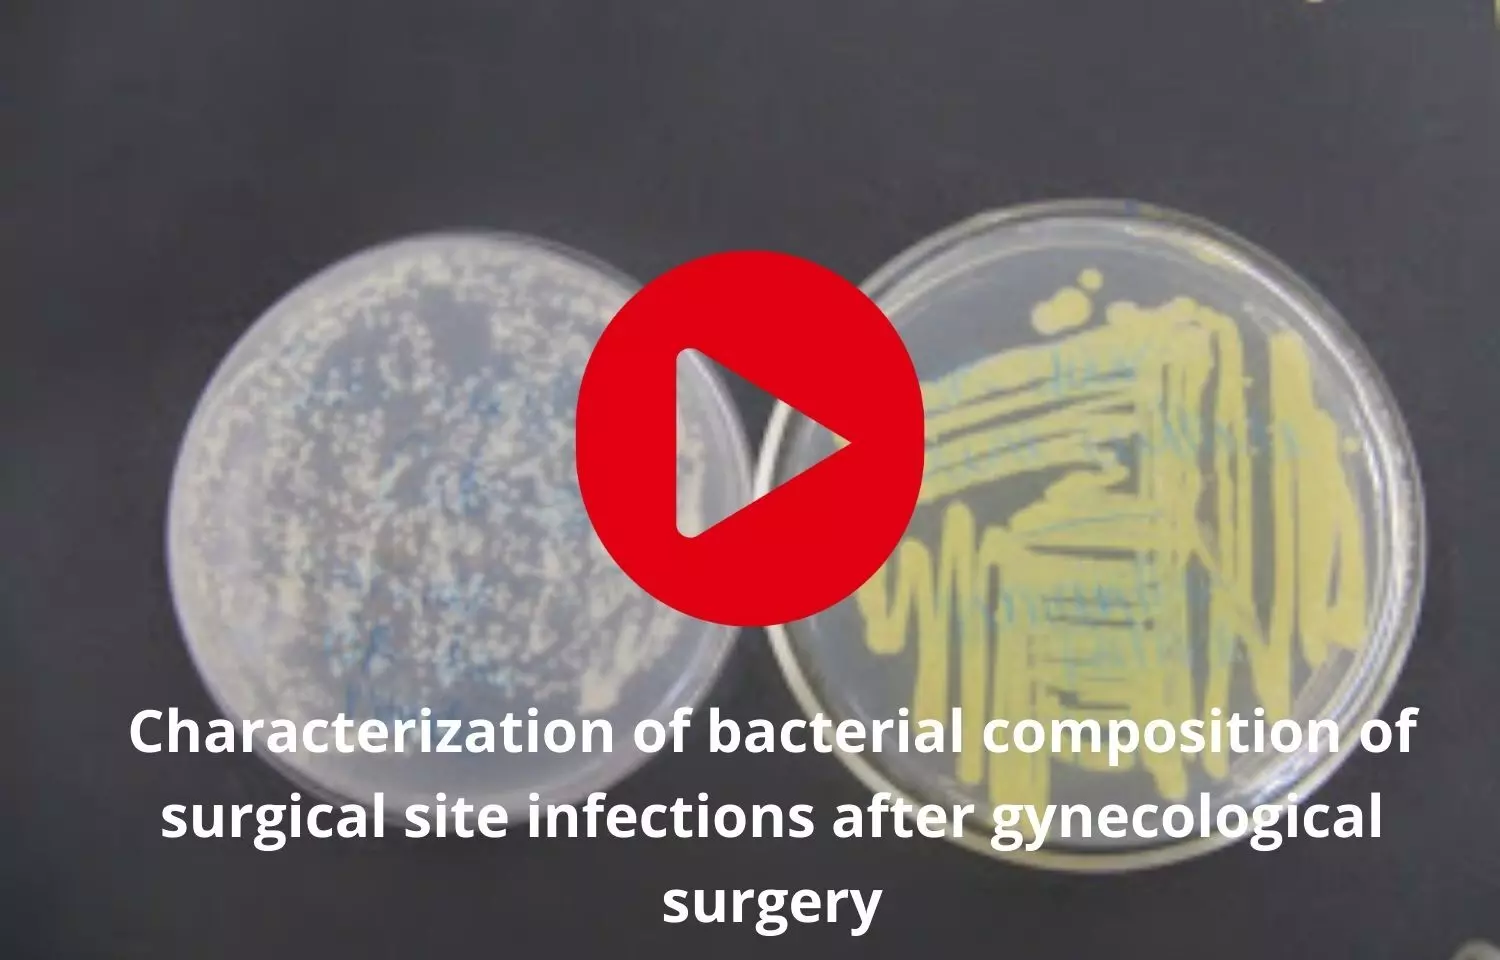 Bacterial composition of surgical site infections after gynecological surgery